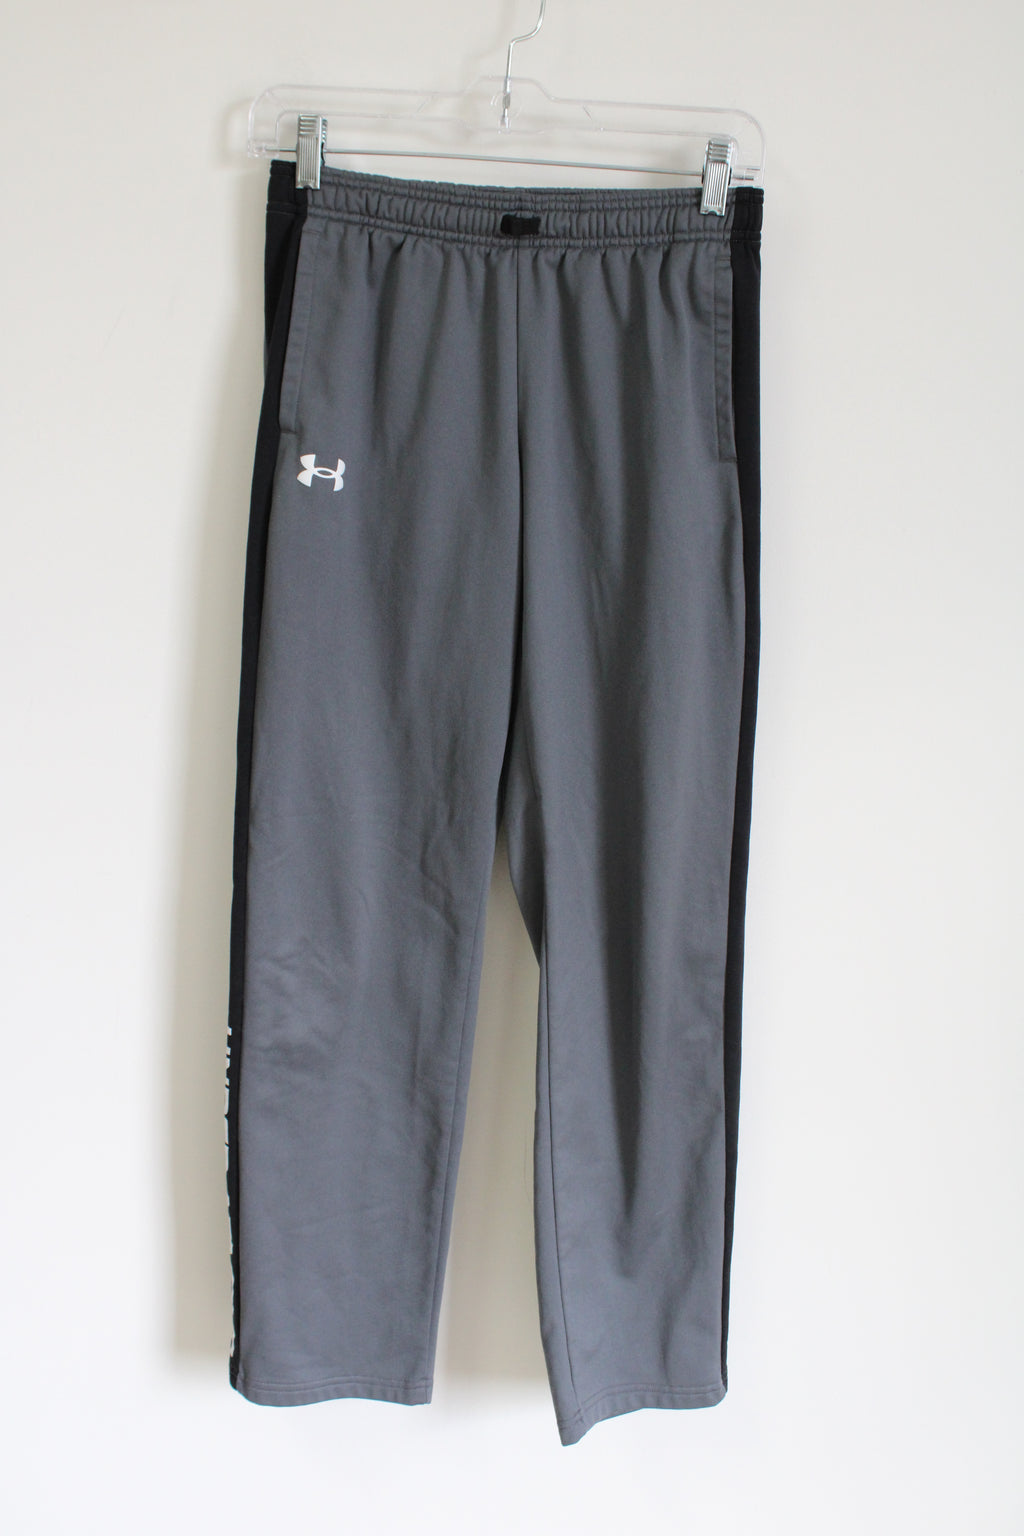 Under Armour Loose Fit Gray Fleece Lined Pants | Youth L (14/16)